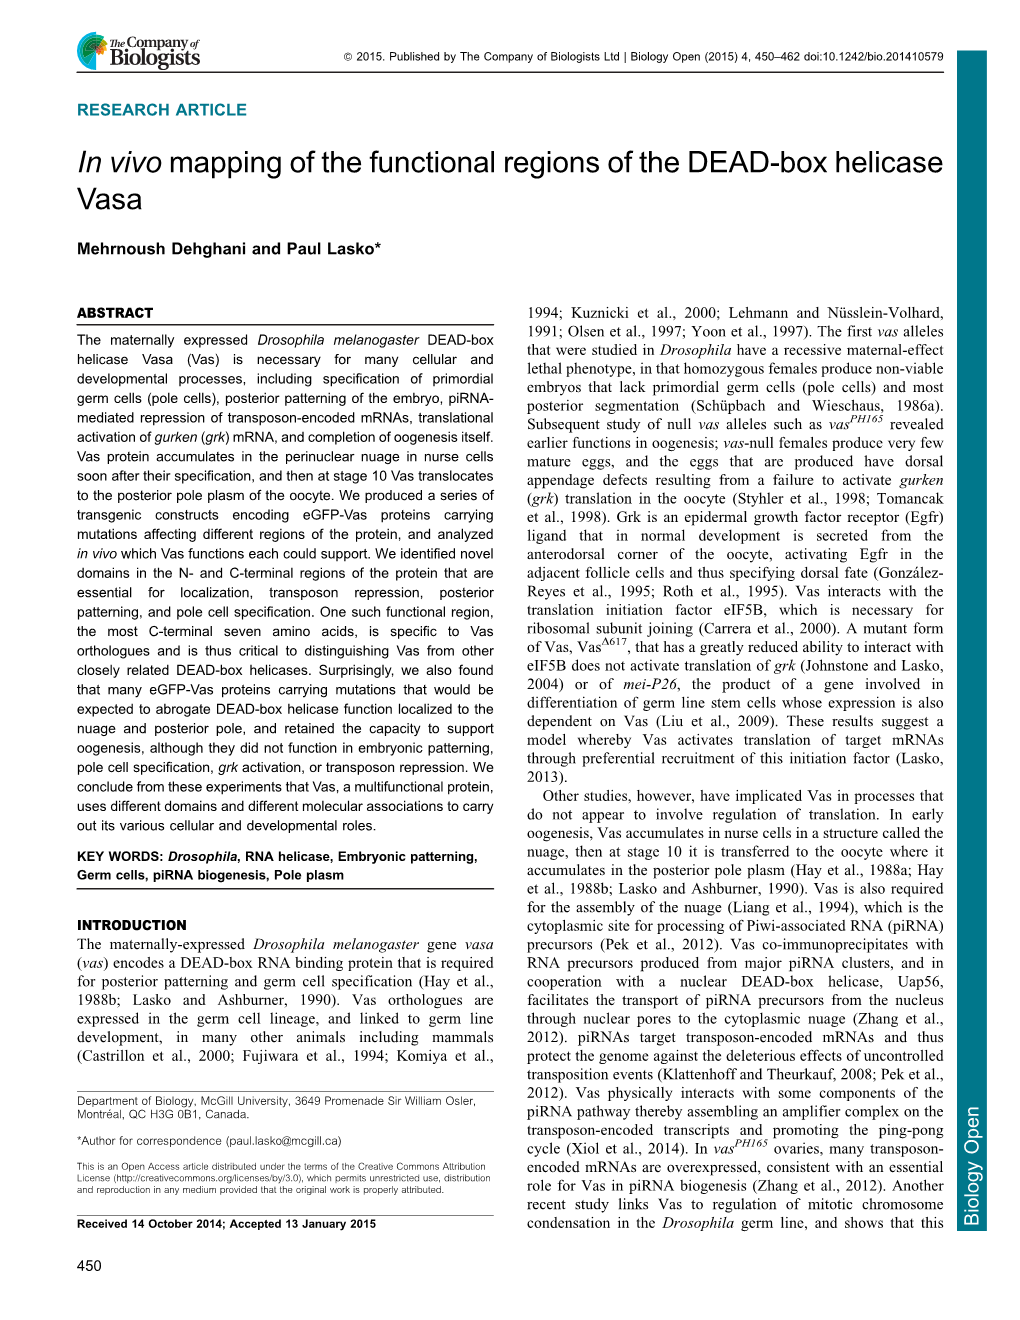 In Vivo Mapping of the Functional Regions of the DEAD-Box Helicase Vasa